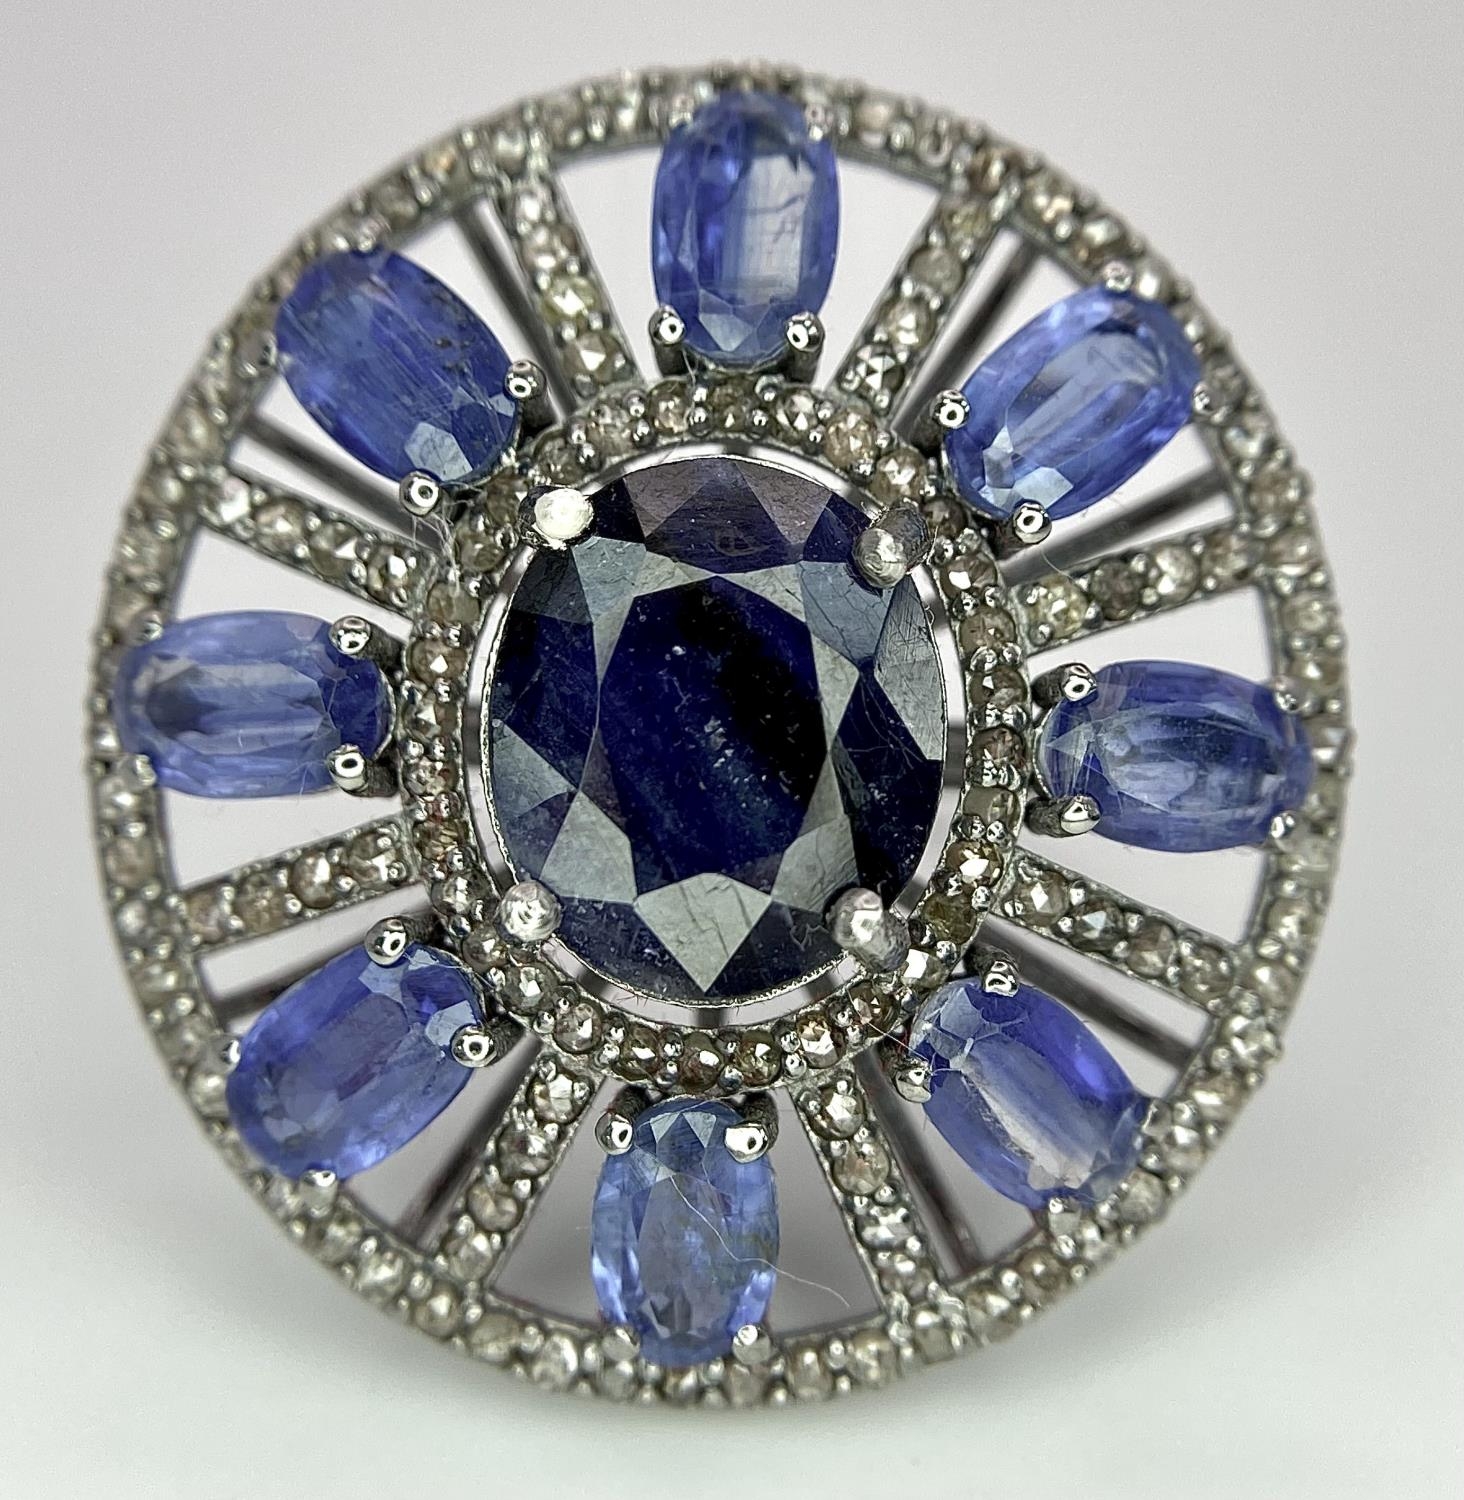 A 10ct Topaz Ring with 6.15ctw of Kyanite surround and 0.50ctw of Diamond Accents. Set in 925 - Image 3 of 6